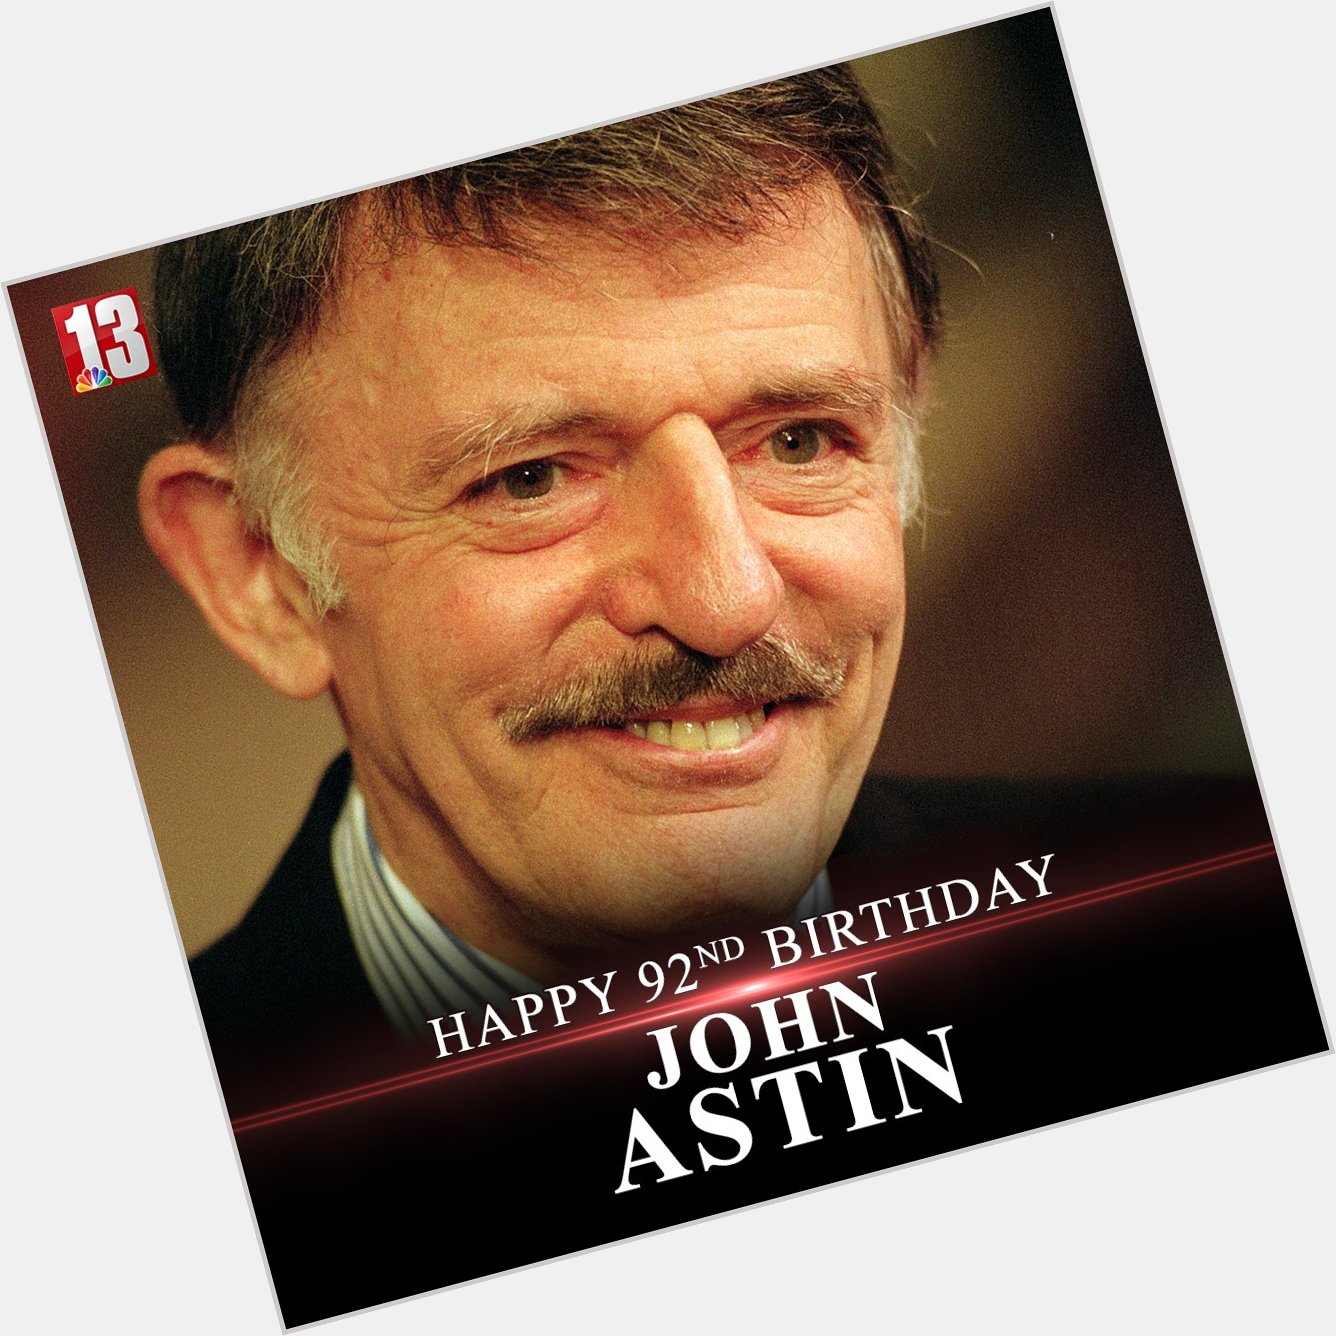   HAPPY BIRTHDAY to John Astin. The man who played the dad on \"The Addams Family\" is *92* today! 